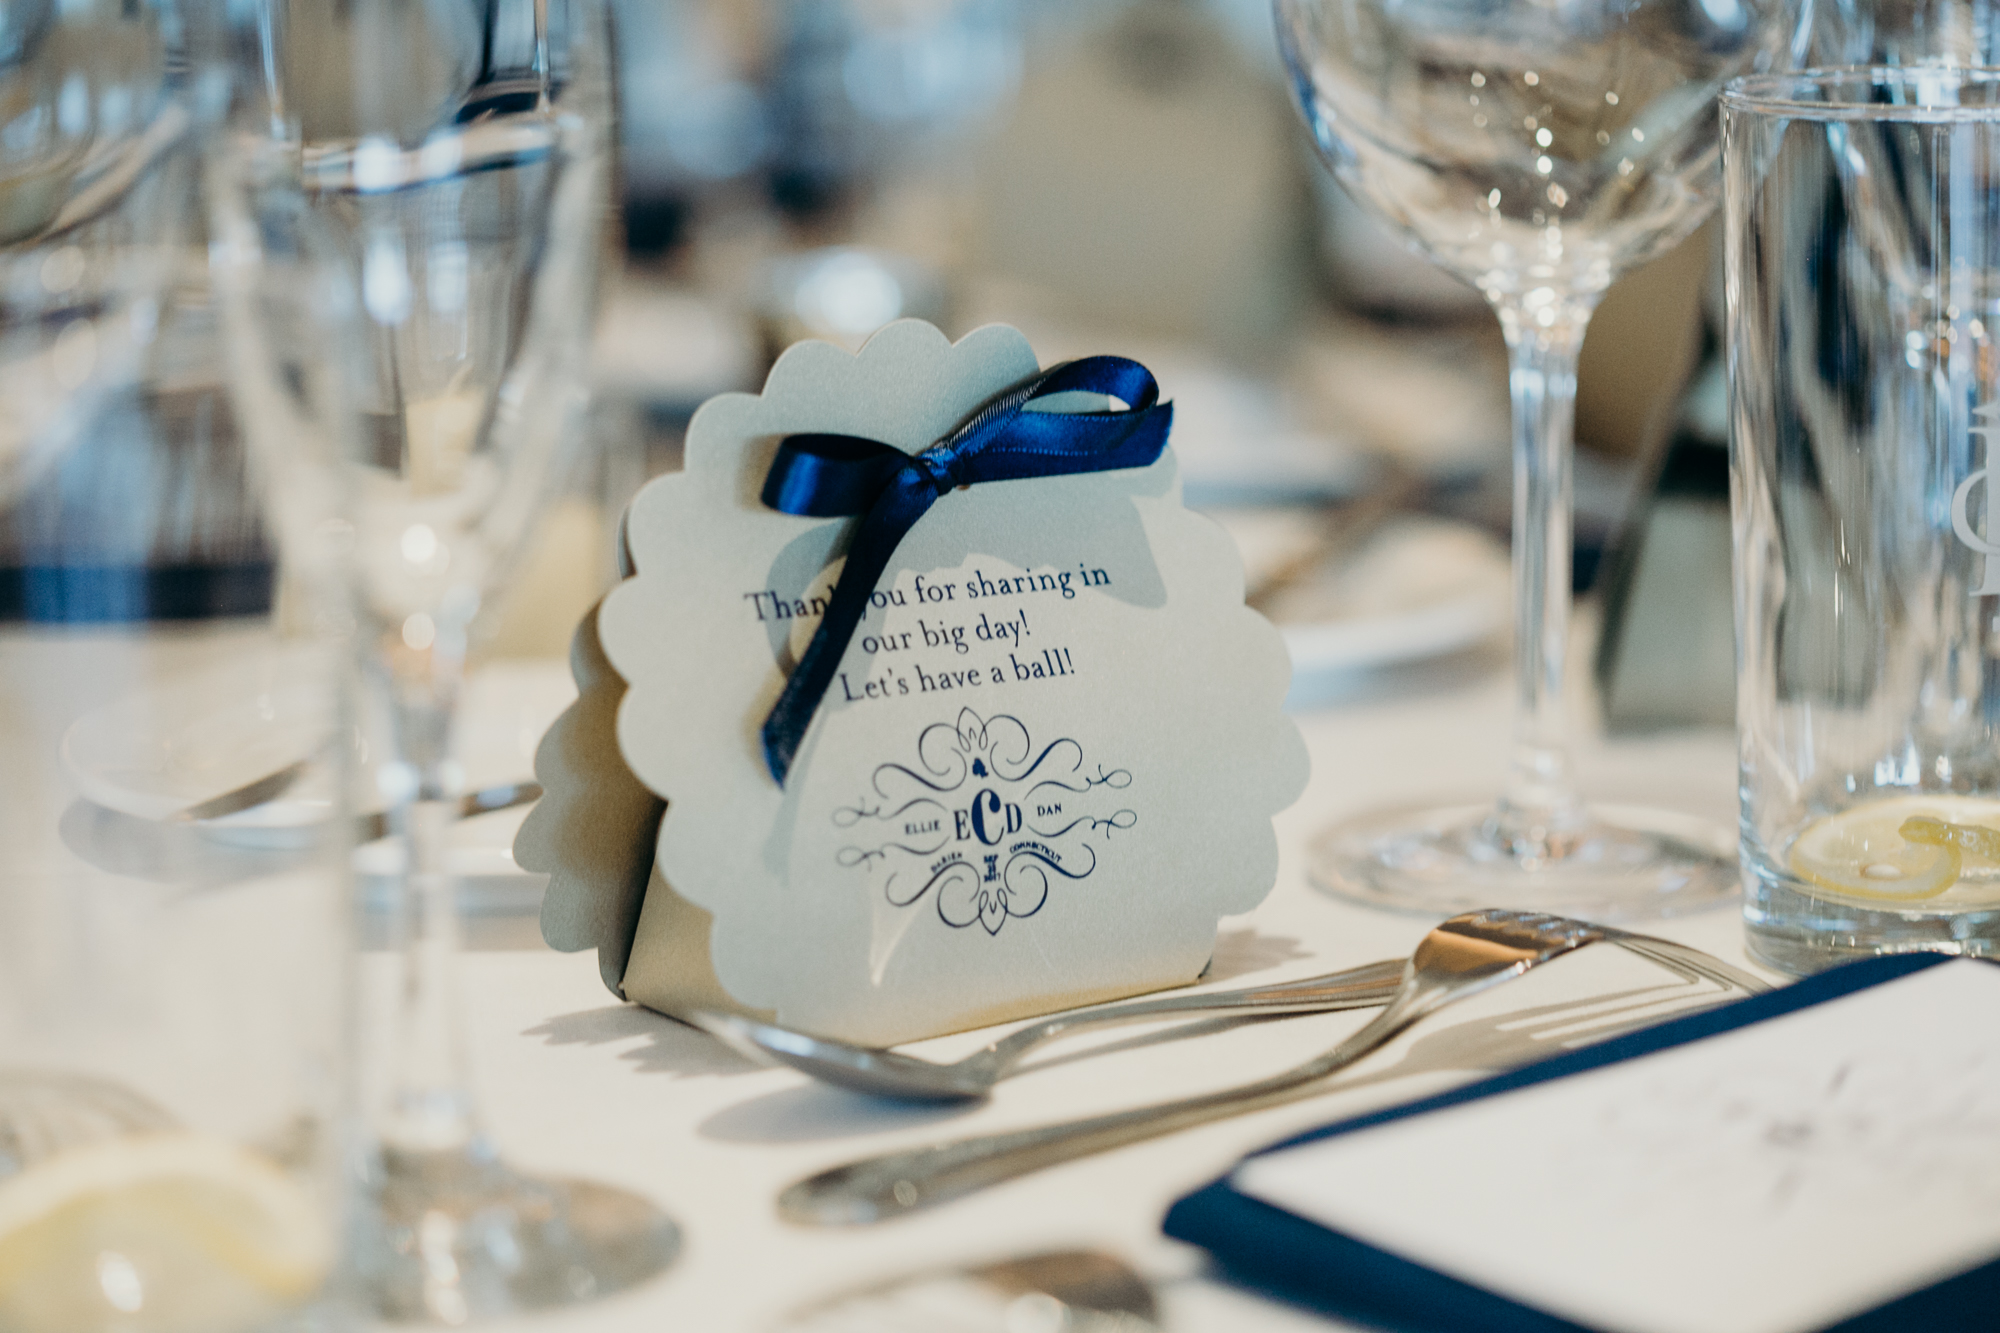 wedding reception gifts and details at country club of darien in darien, connecticut